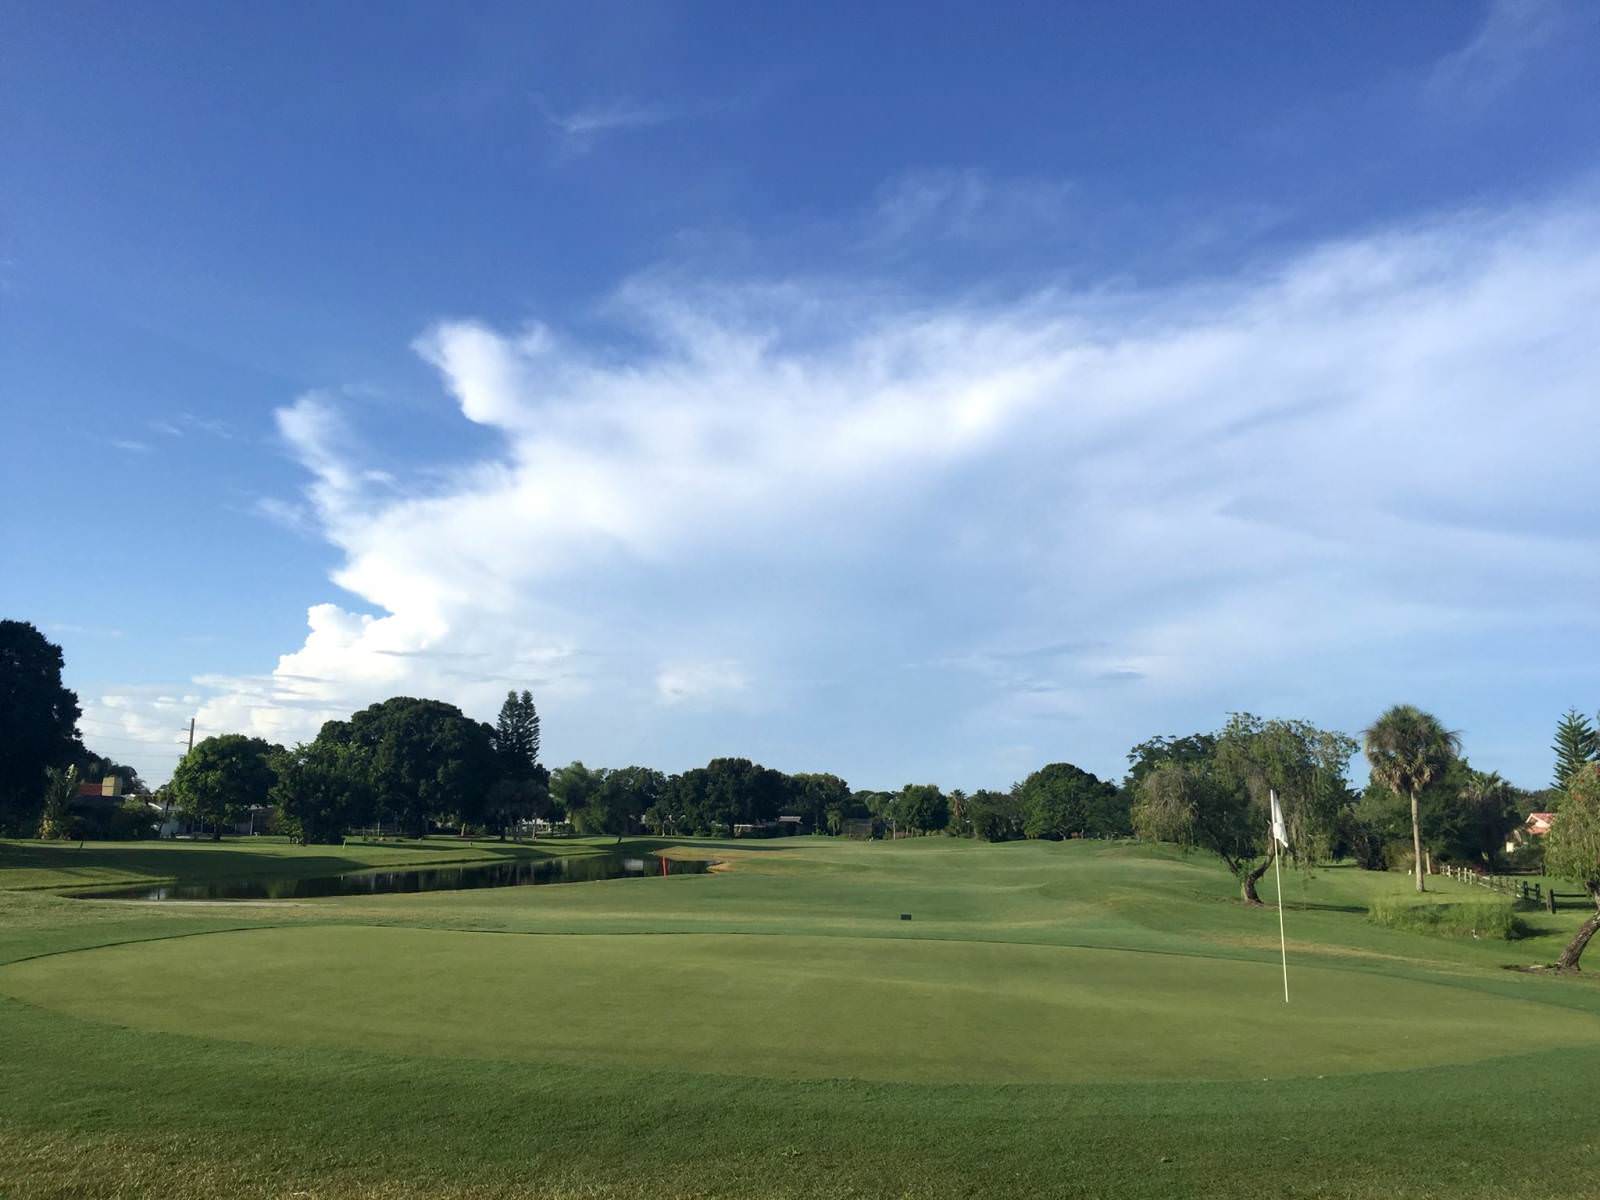 The redesigned Palms Golf Course at Forest Lakes is a must for any Sarasota golfer looking for a challenging course in beautiful surroundings. #golf #florida #sarasota #bestgolfcoursestoplay